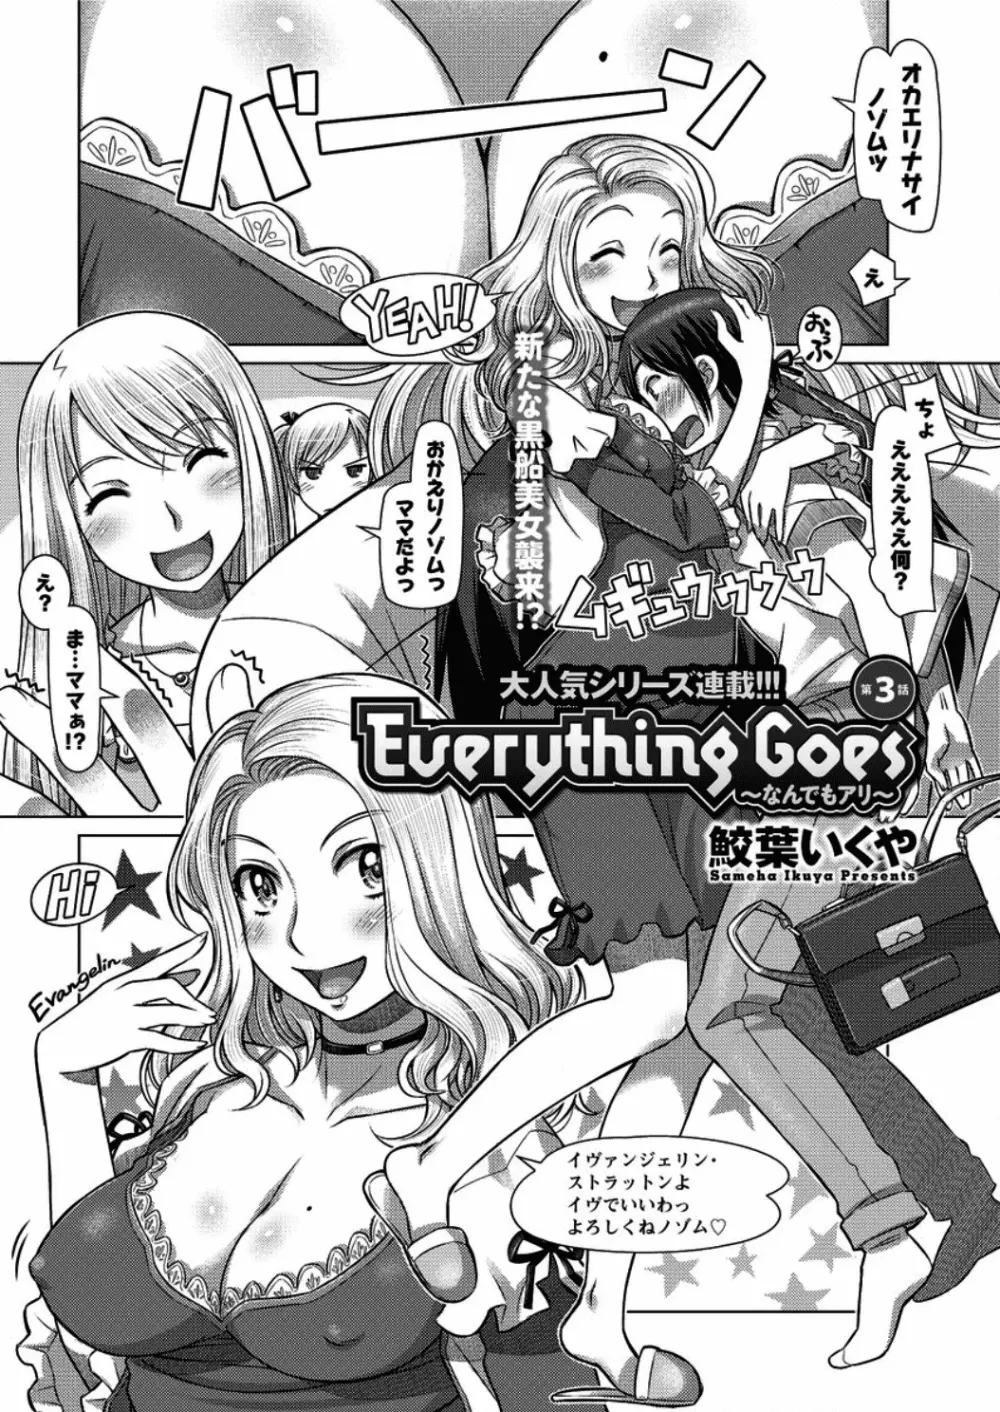 Everything Goes 第1-3話 42ページ